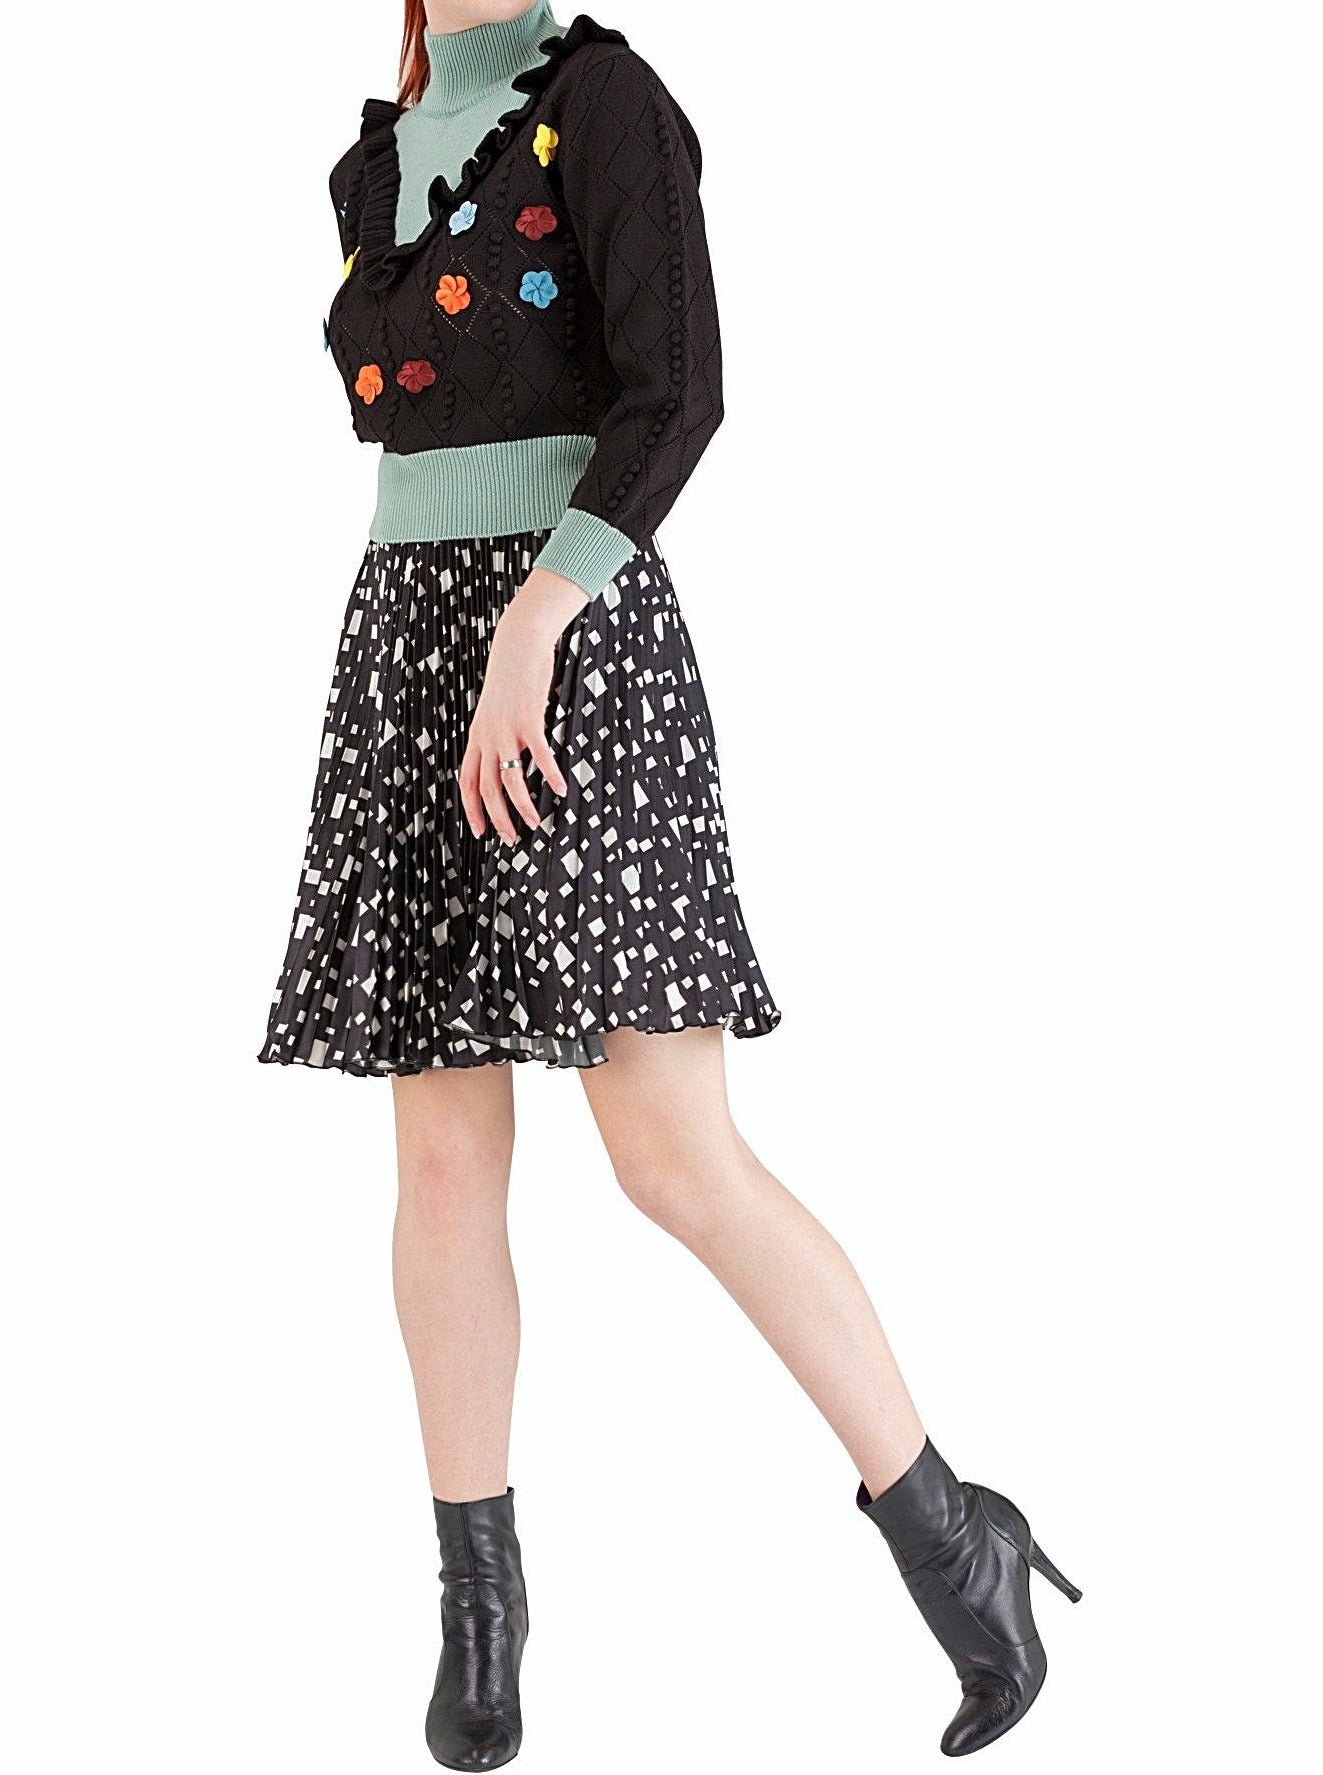 Floral Wool Sweater - 80% off